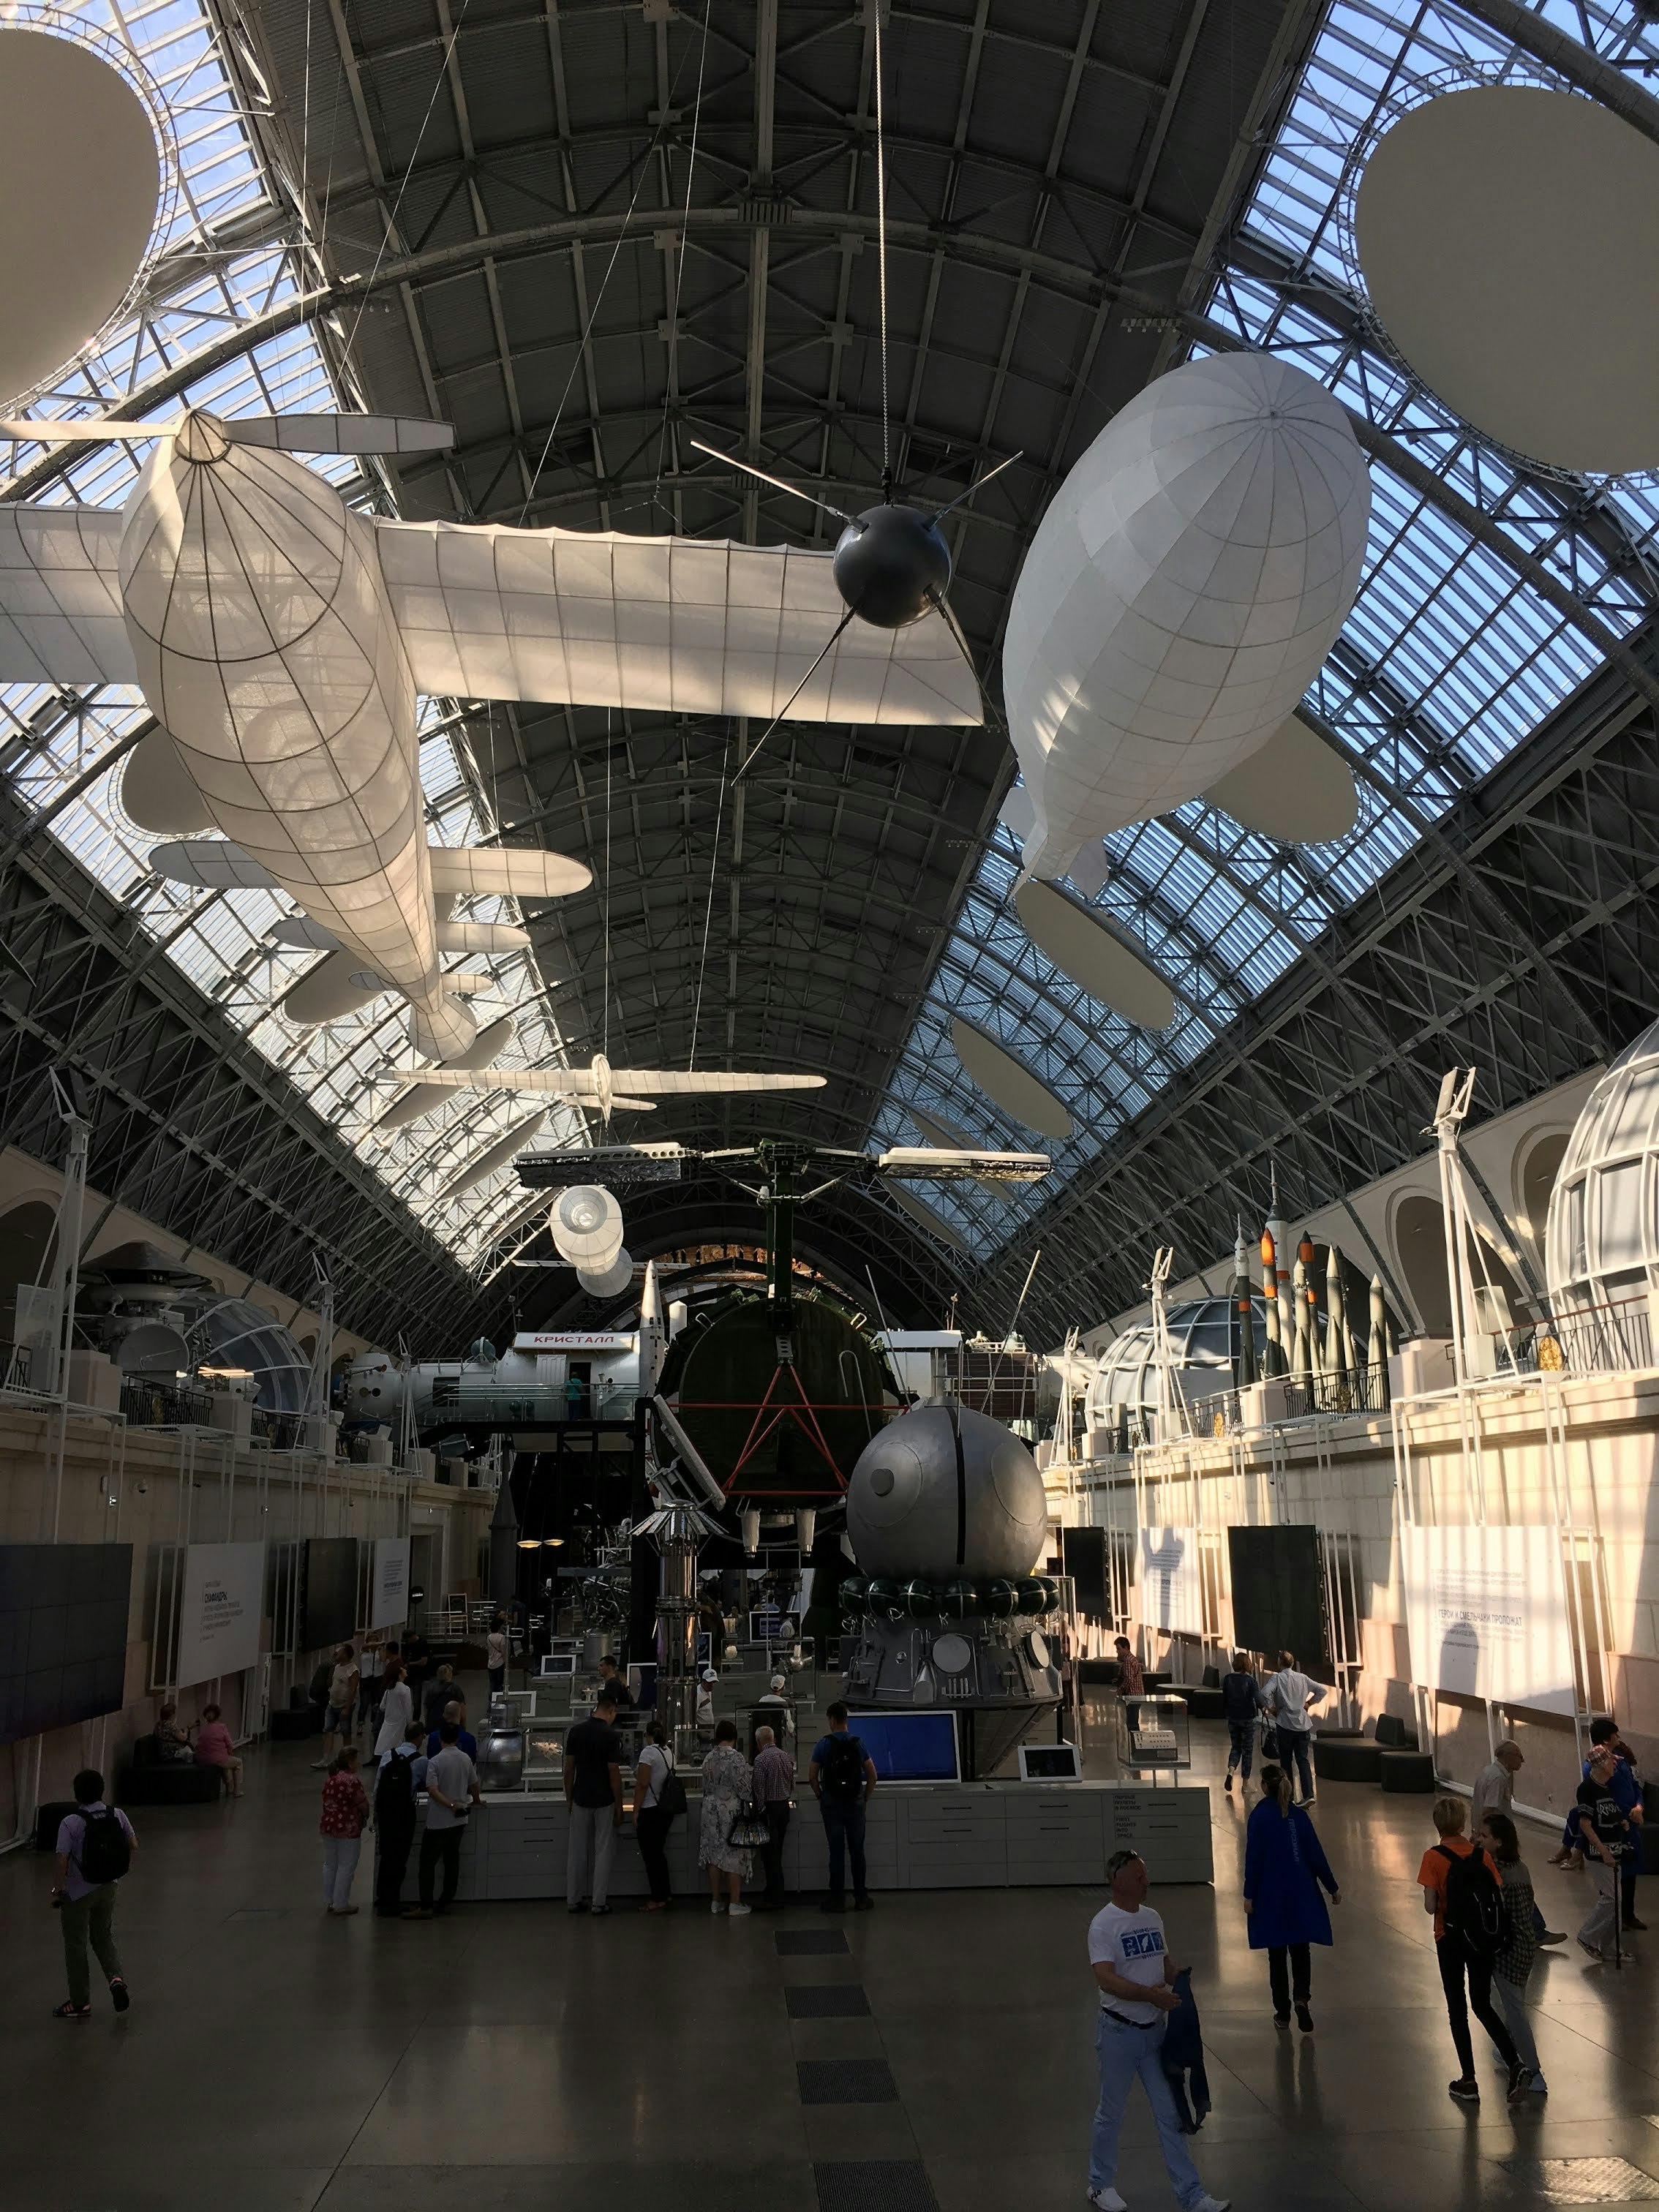 A large room with a steel and glass roof. There are objects hanging from the ceiling including a plane and a blimp, which both appear to be made of paper